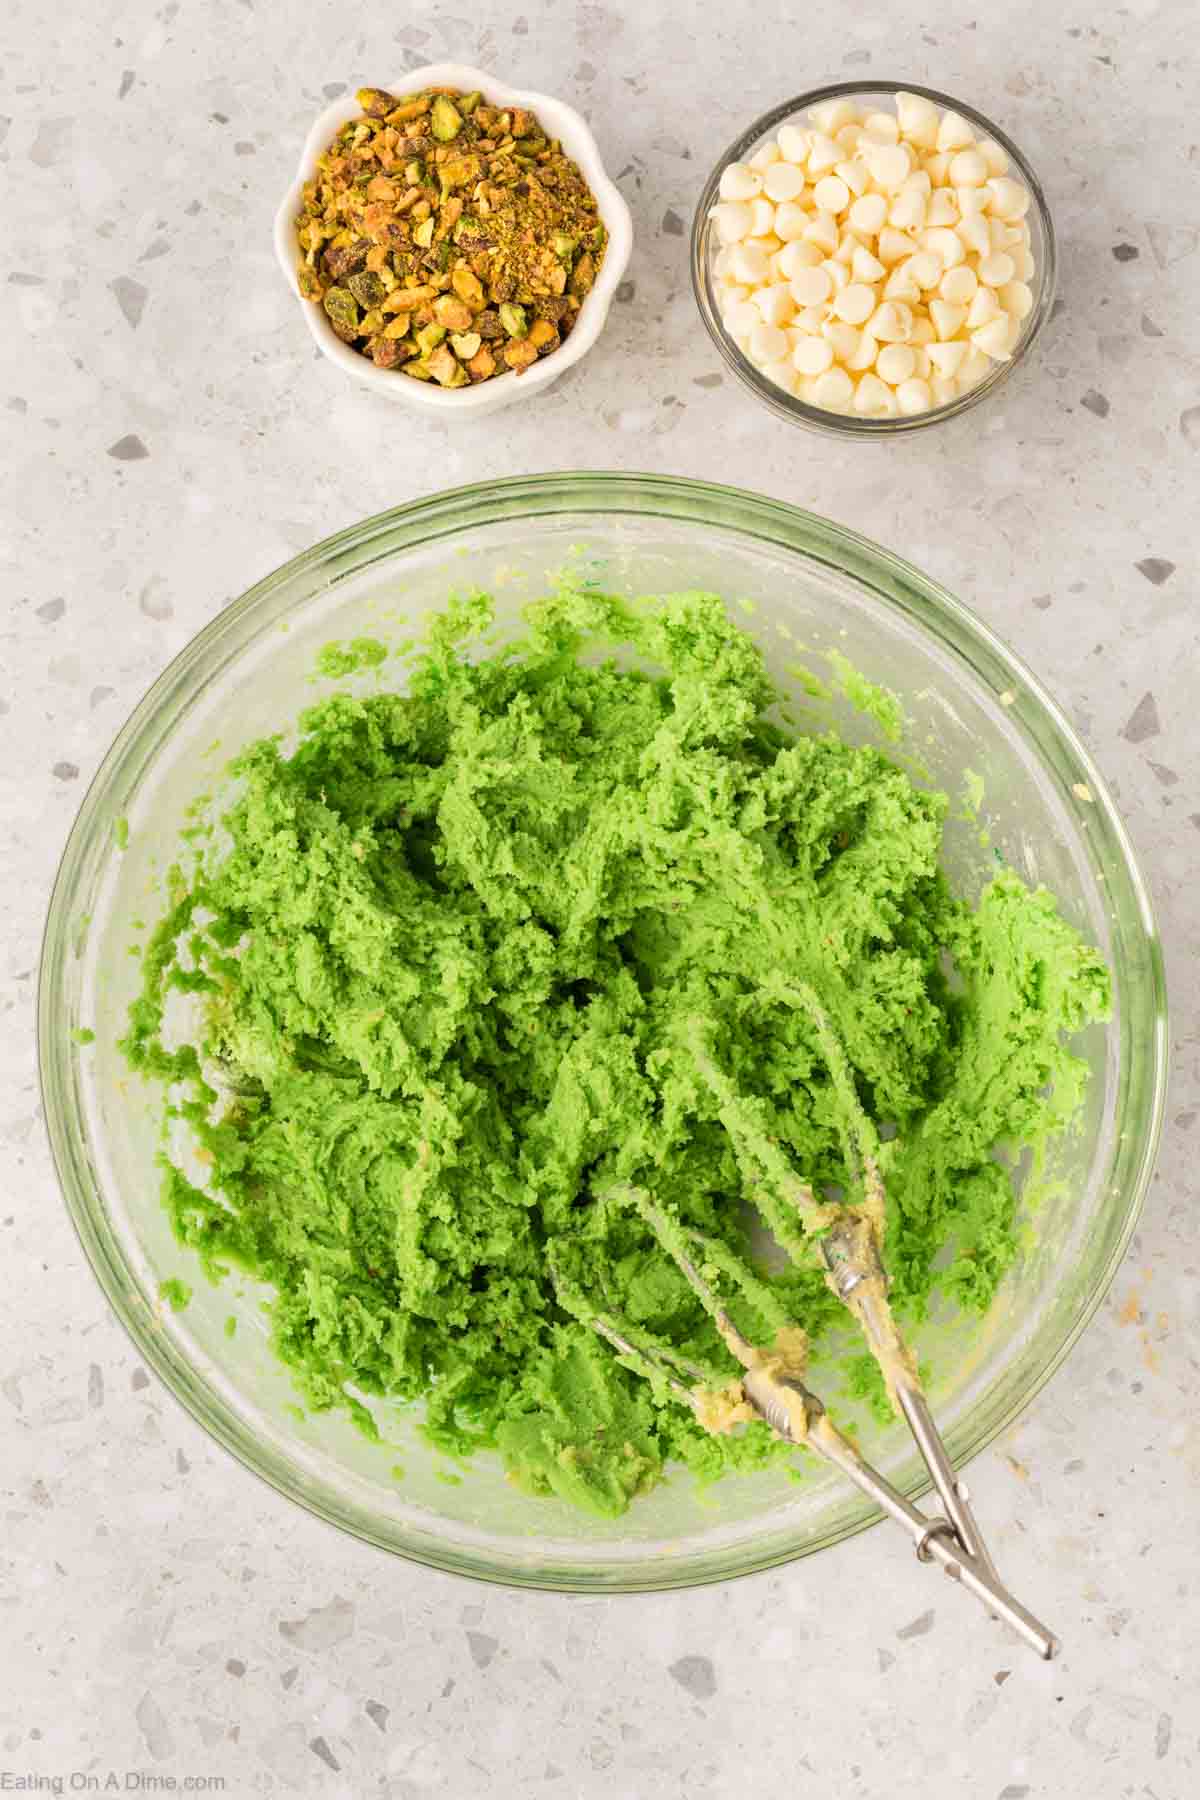 Mix dry ingredients and wet ingredients together and add in green food coloring